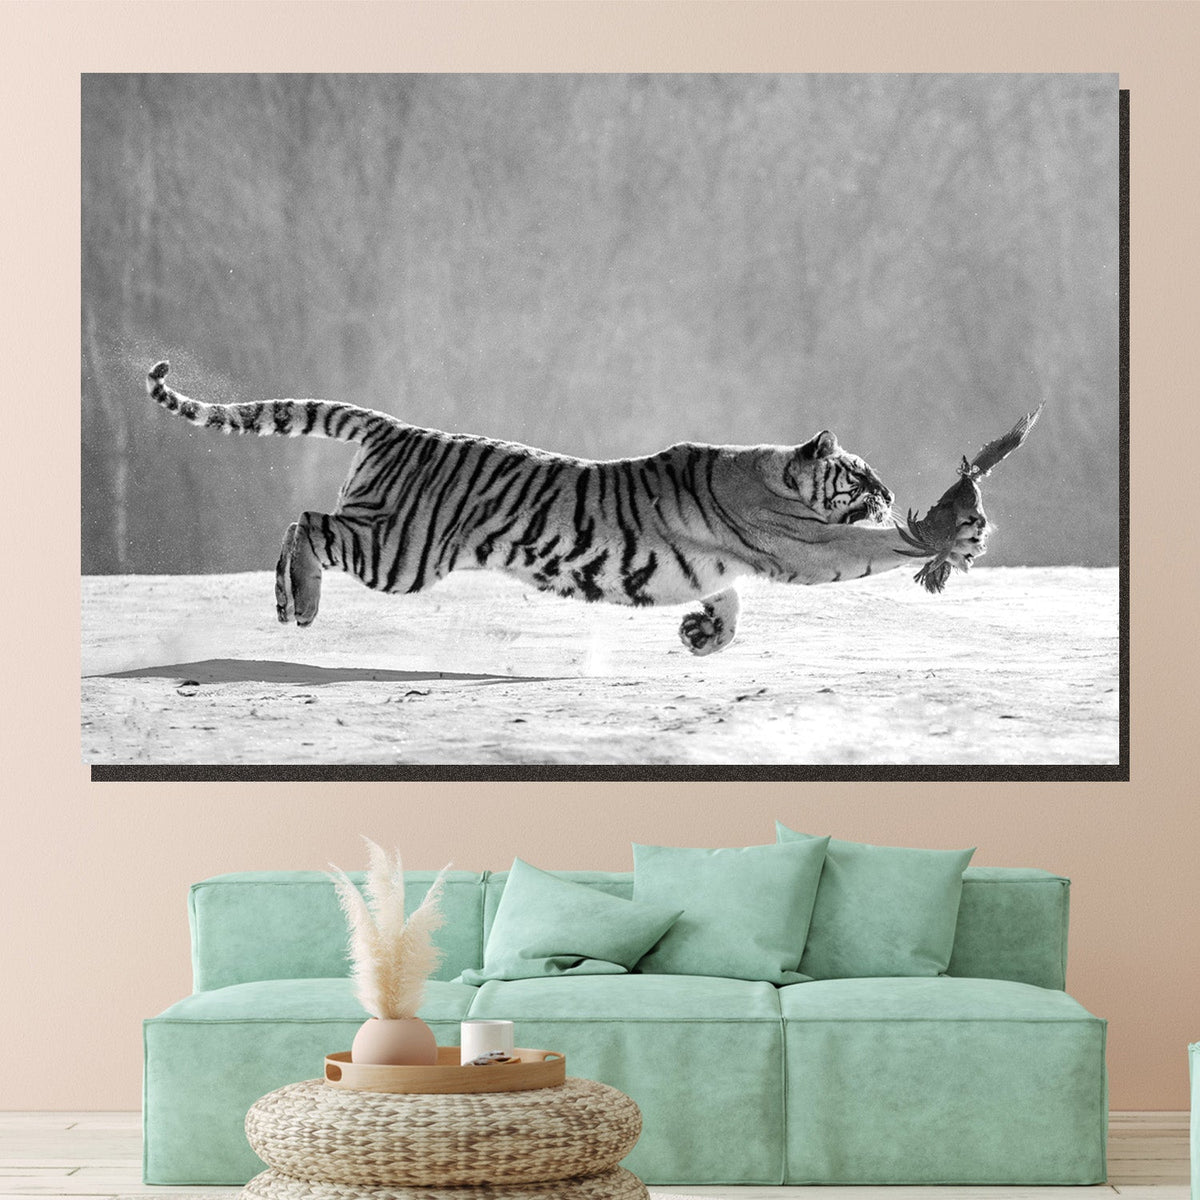 https://cdn.shopify.com/s/files/1/0387/9986/8044/products/SiberianTigerCanvasArtprintStretched-1.jpg